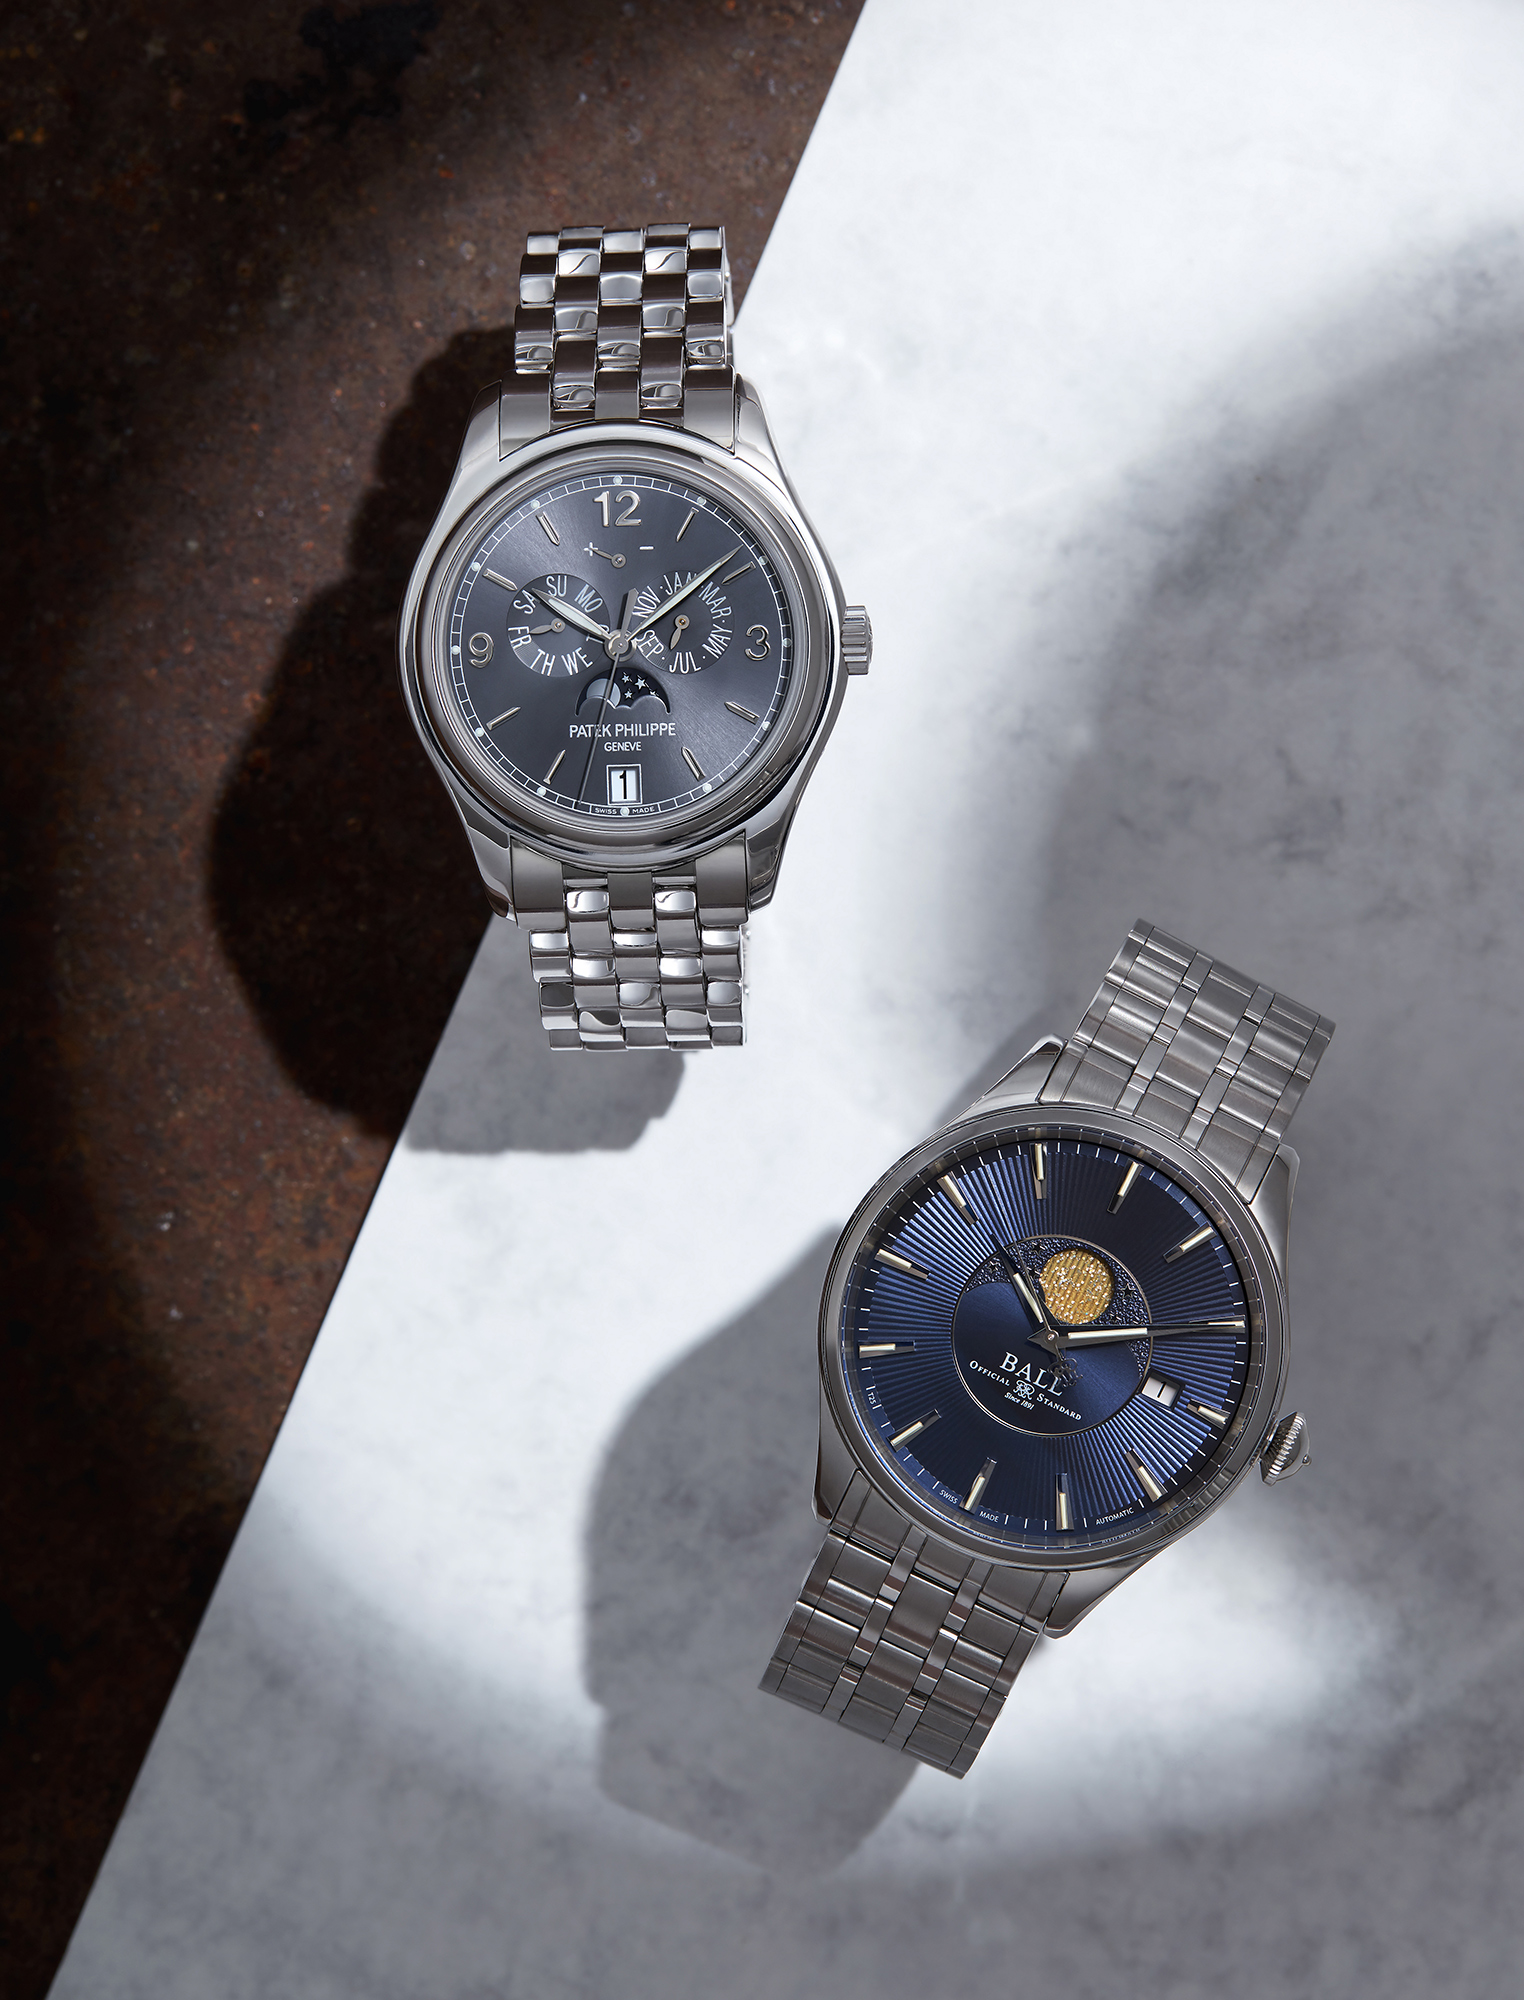 From left to right: Gentleman’s self-winding Annual Calendar bracelet in white gold with slate grey sunburst dial, £50,610, PATEK PHILIPPE; Trainmaster Moonphase, £1,750, BALL